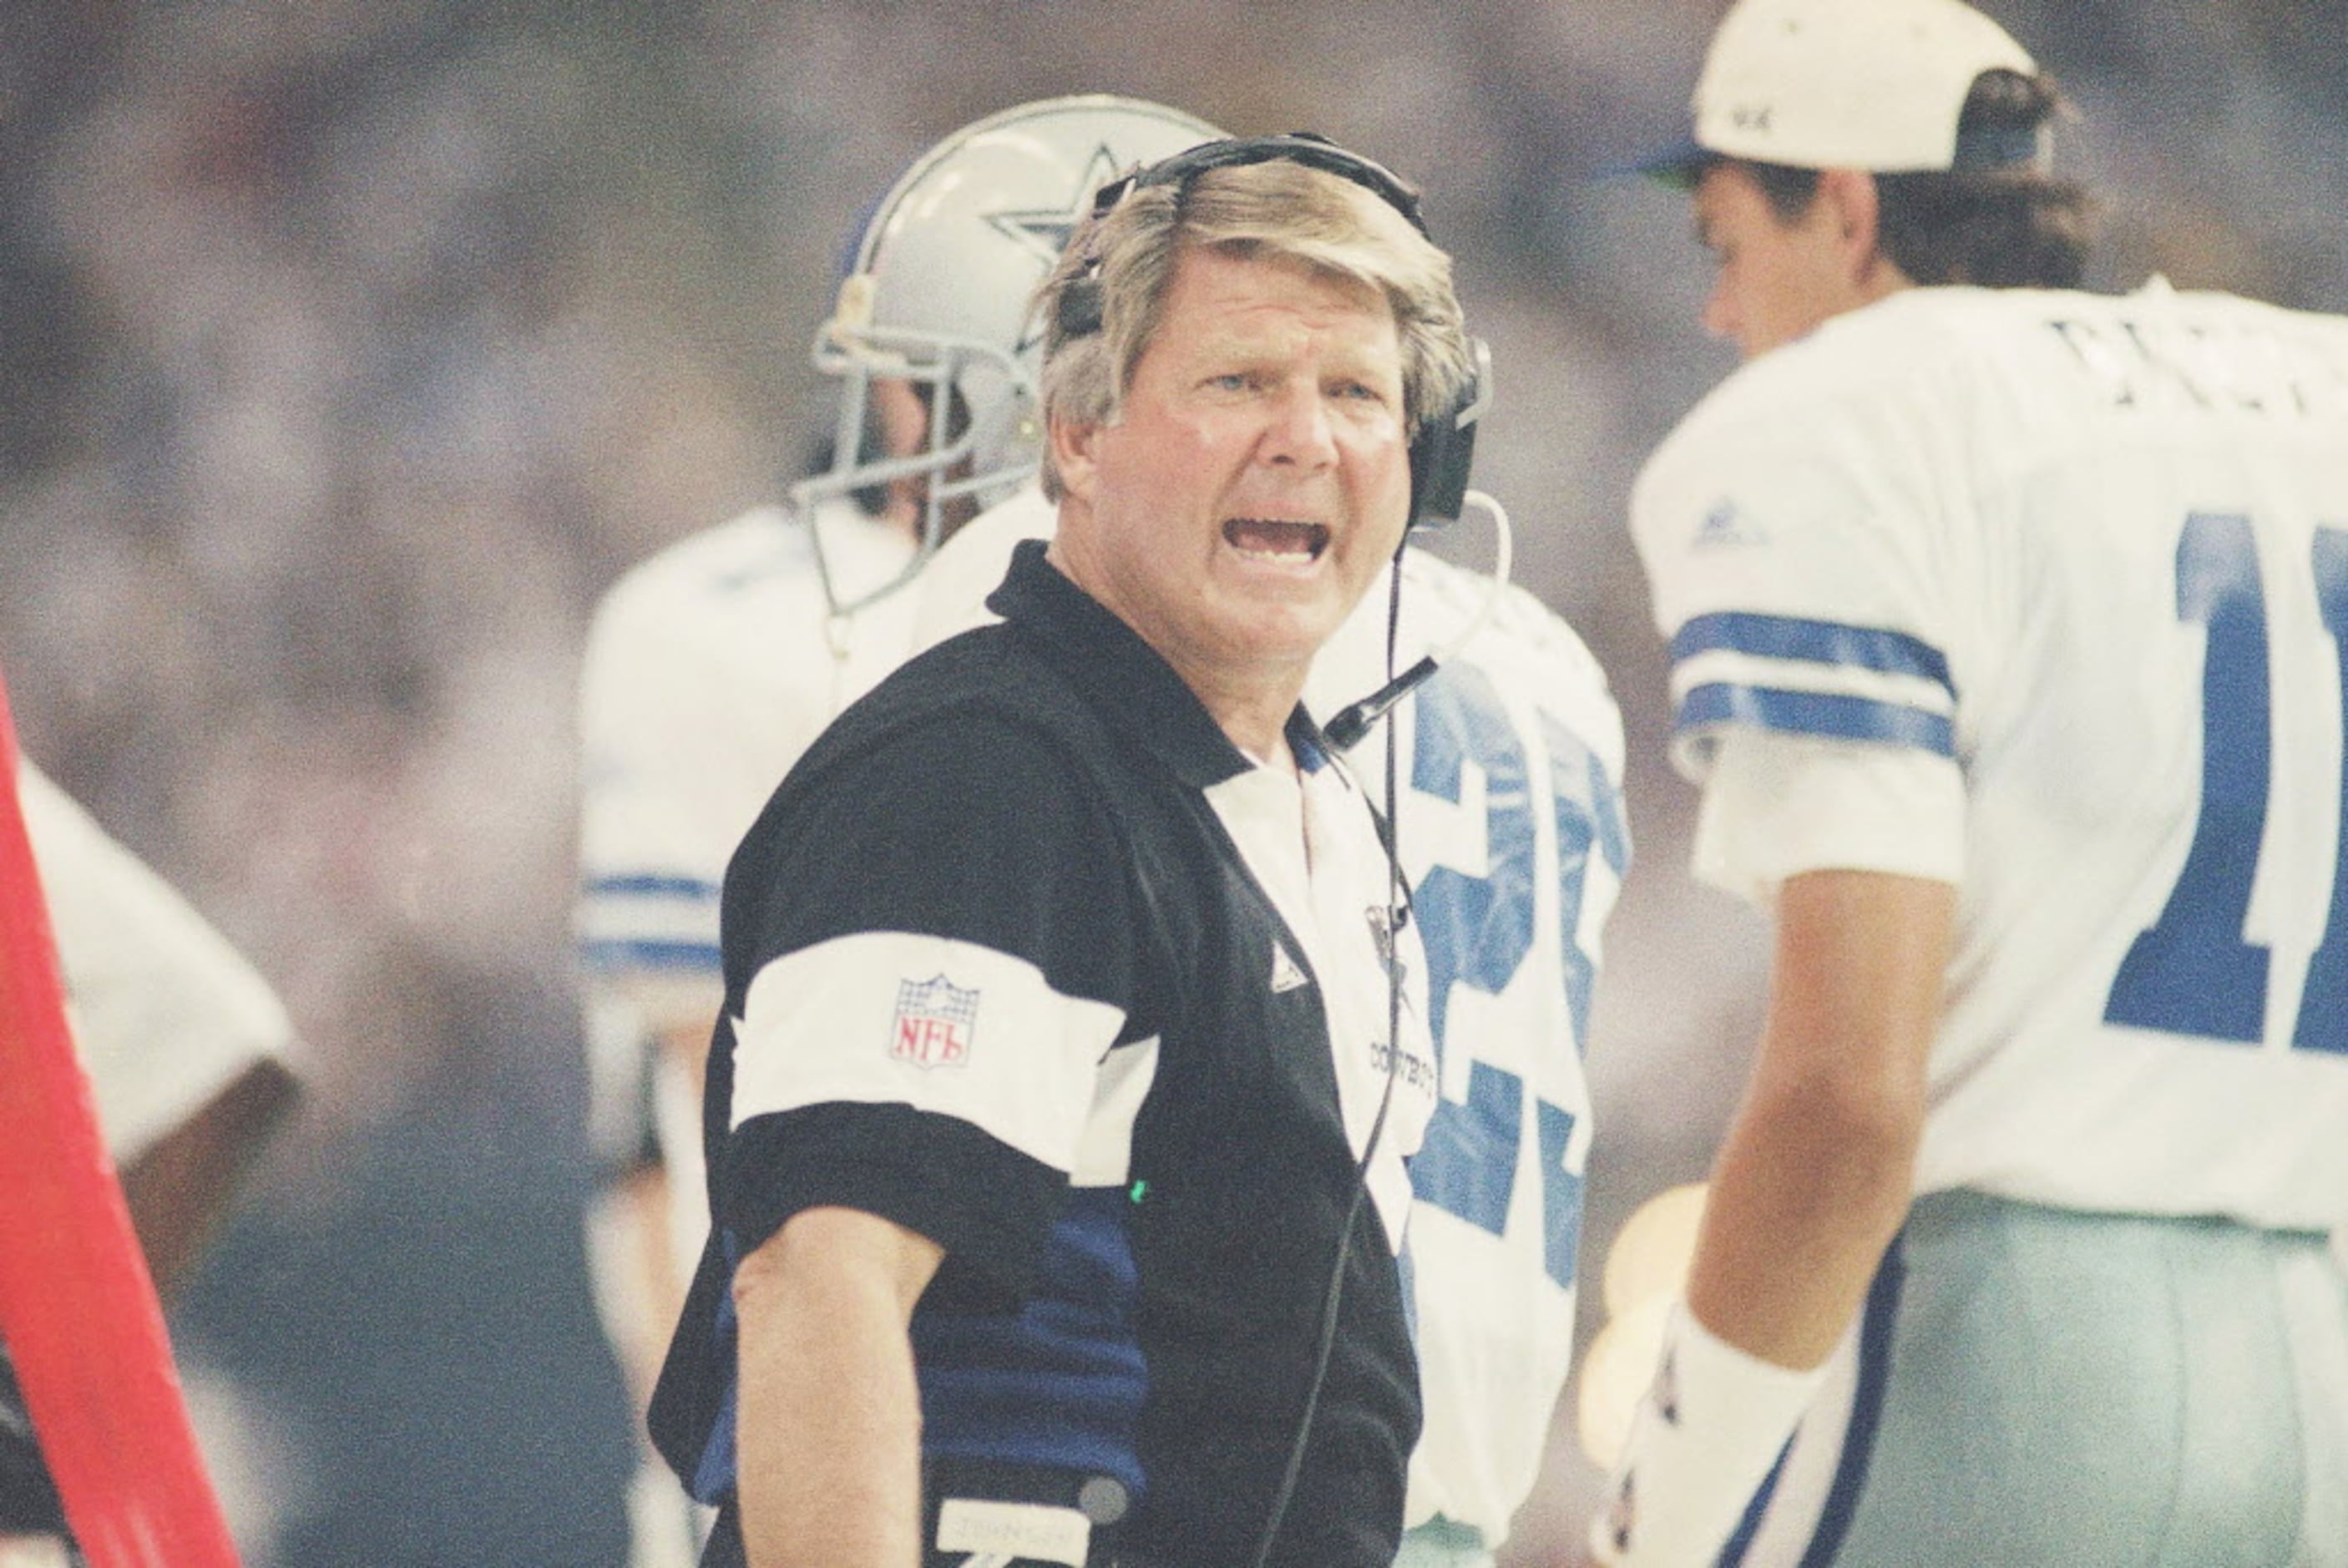 Sherrington: Jimmy Johnson might be in Ring of Honor someday, but not until